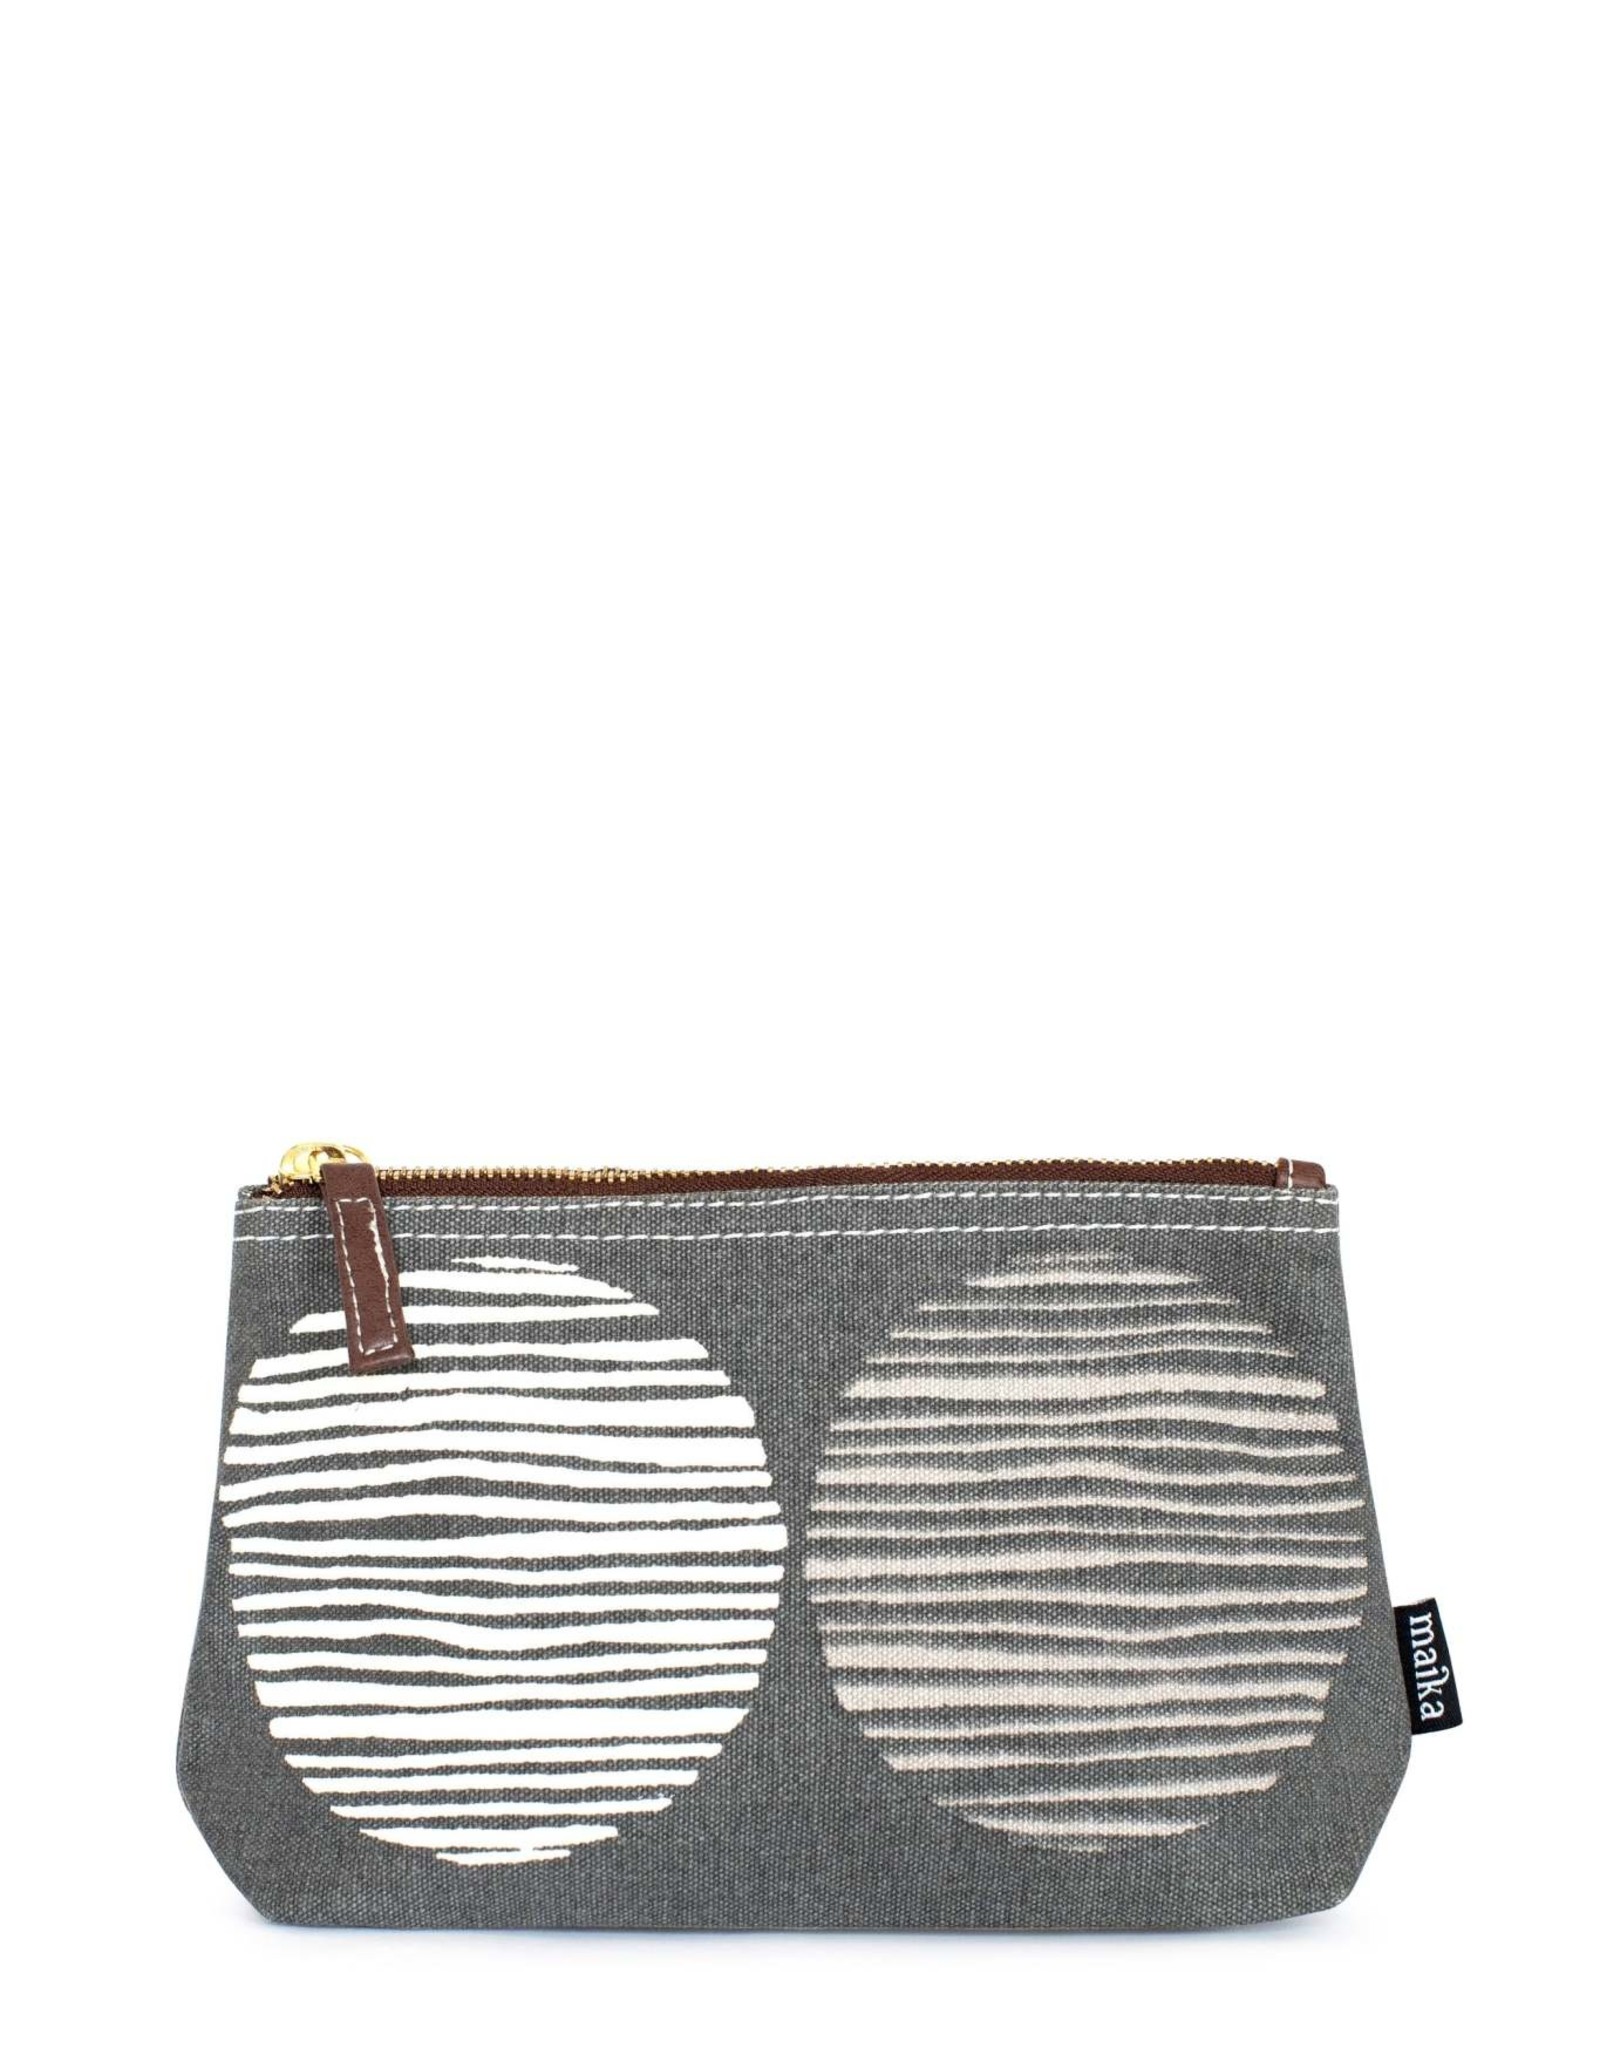 Maika Goods Recycled Canvas Pouch Medium - Big Sur